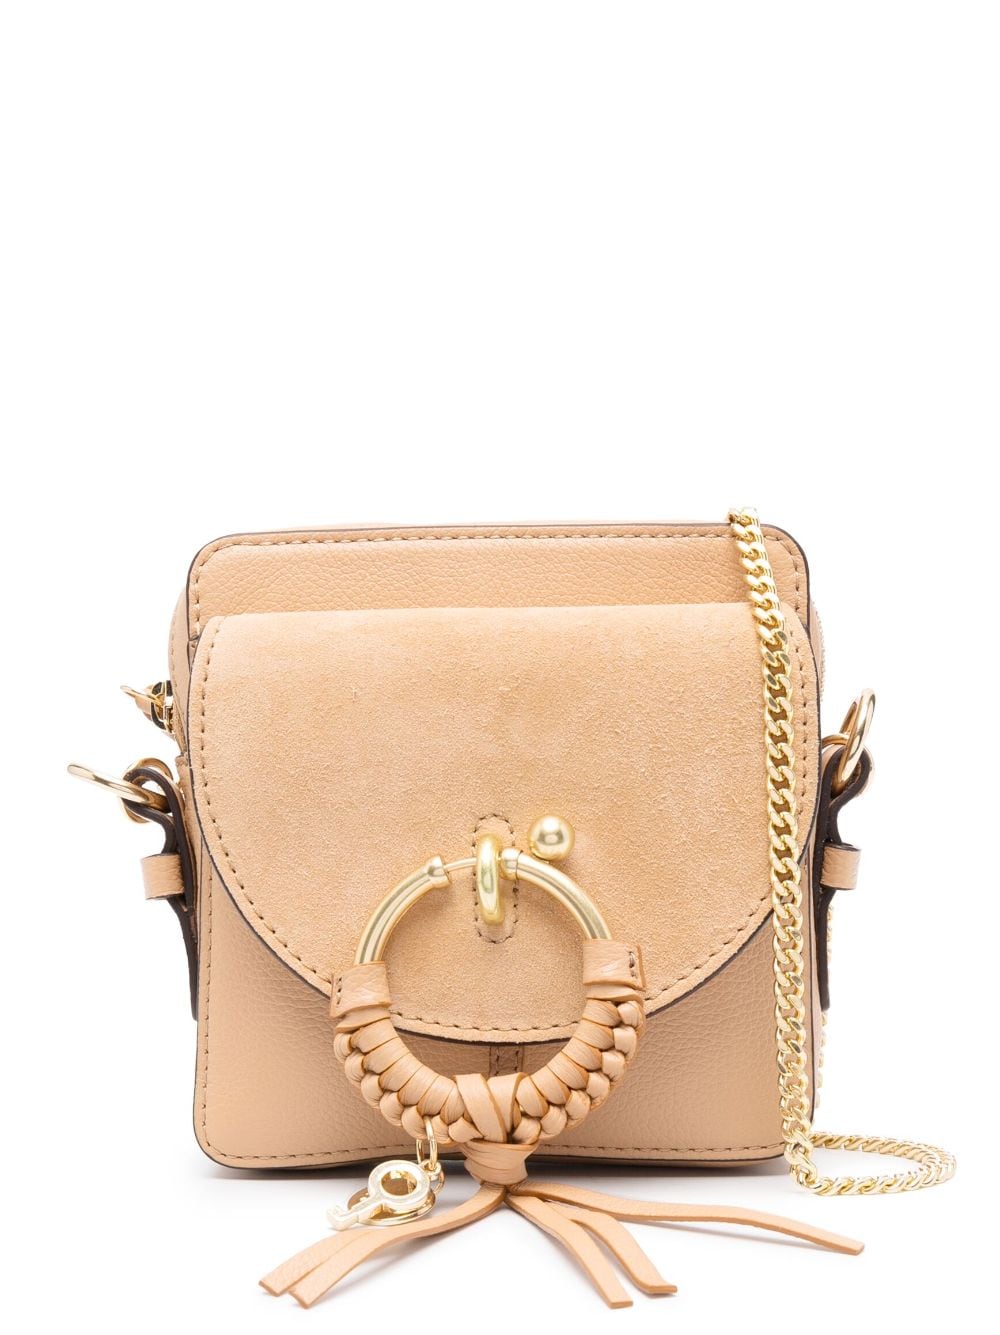 See by Chloé leather satchel bag - Neutrals von See by Chloé